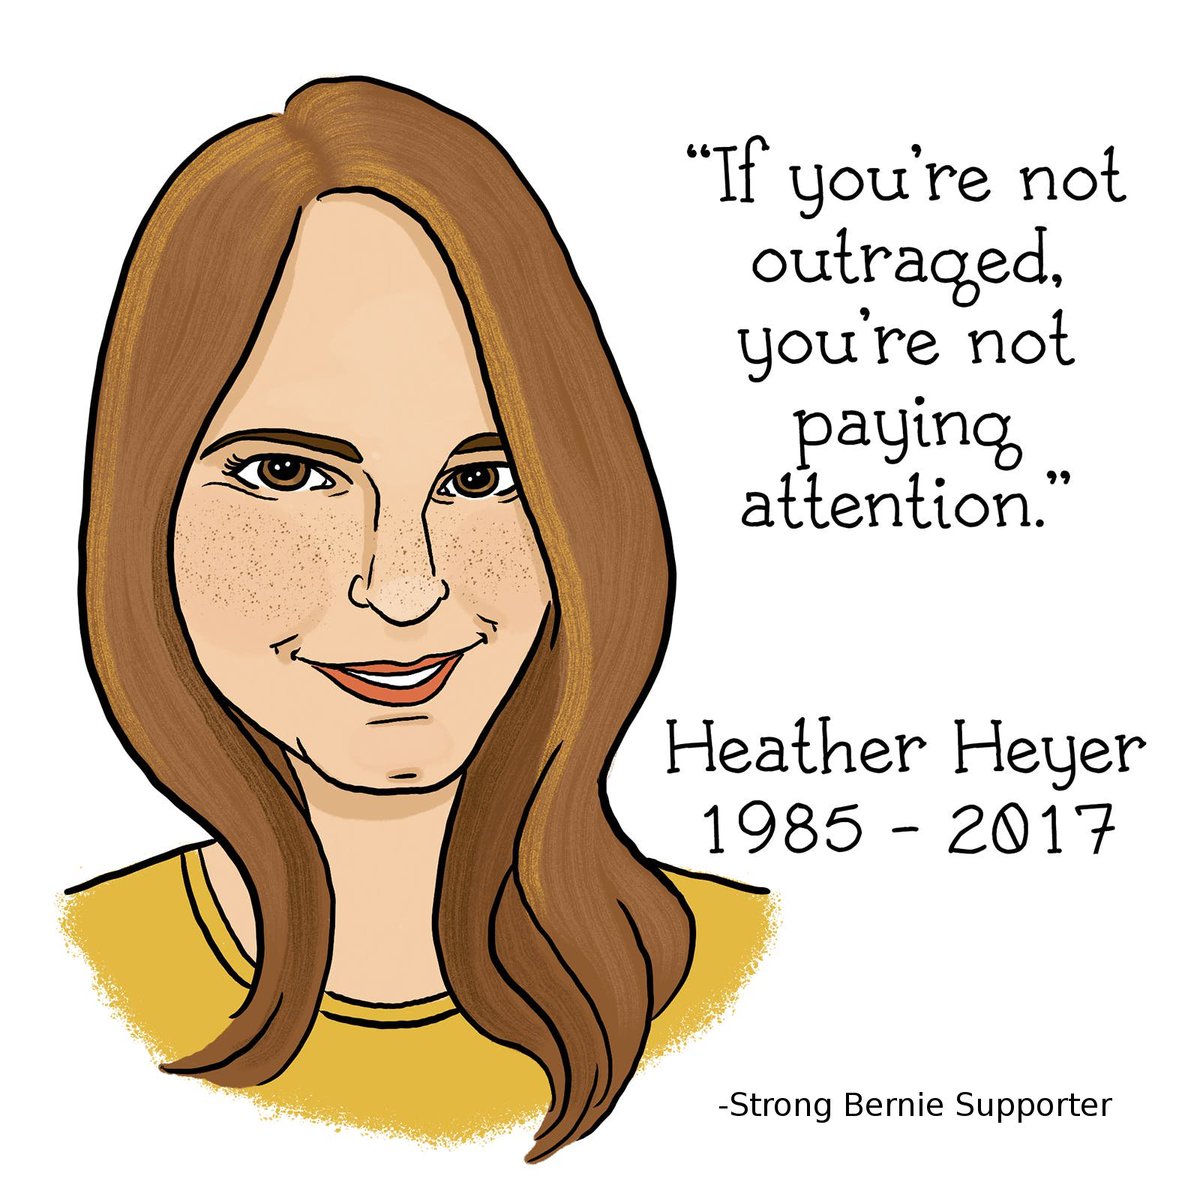 With all of the injustice in this world, we have a real shot at making the world a little better with #Bernie2020

#RememberHeatherHeyer #HeatherHeyer #RIPheather